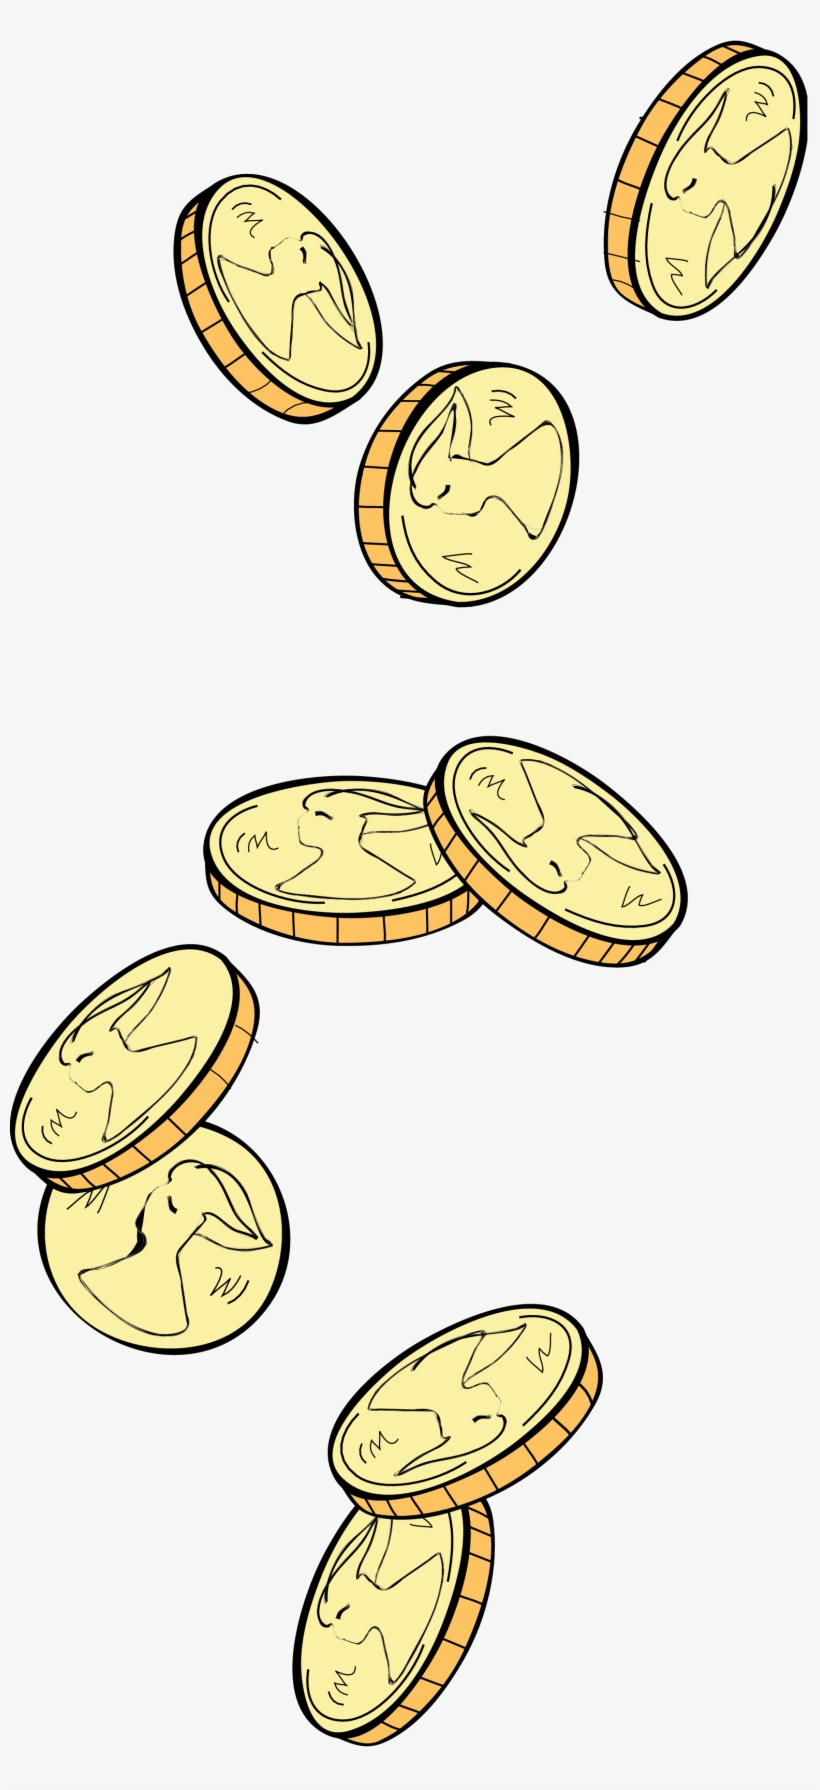 Many Falling Coins - Falling Coins Png, transparent png #36212